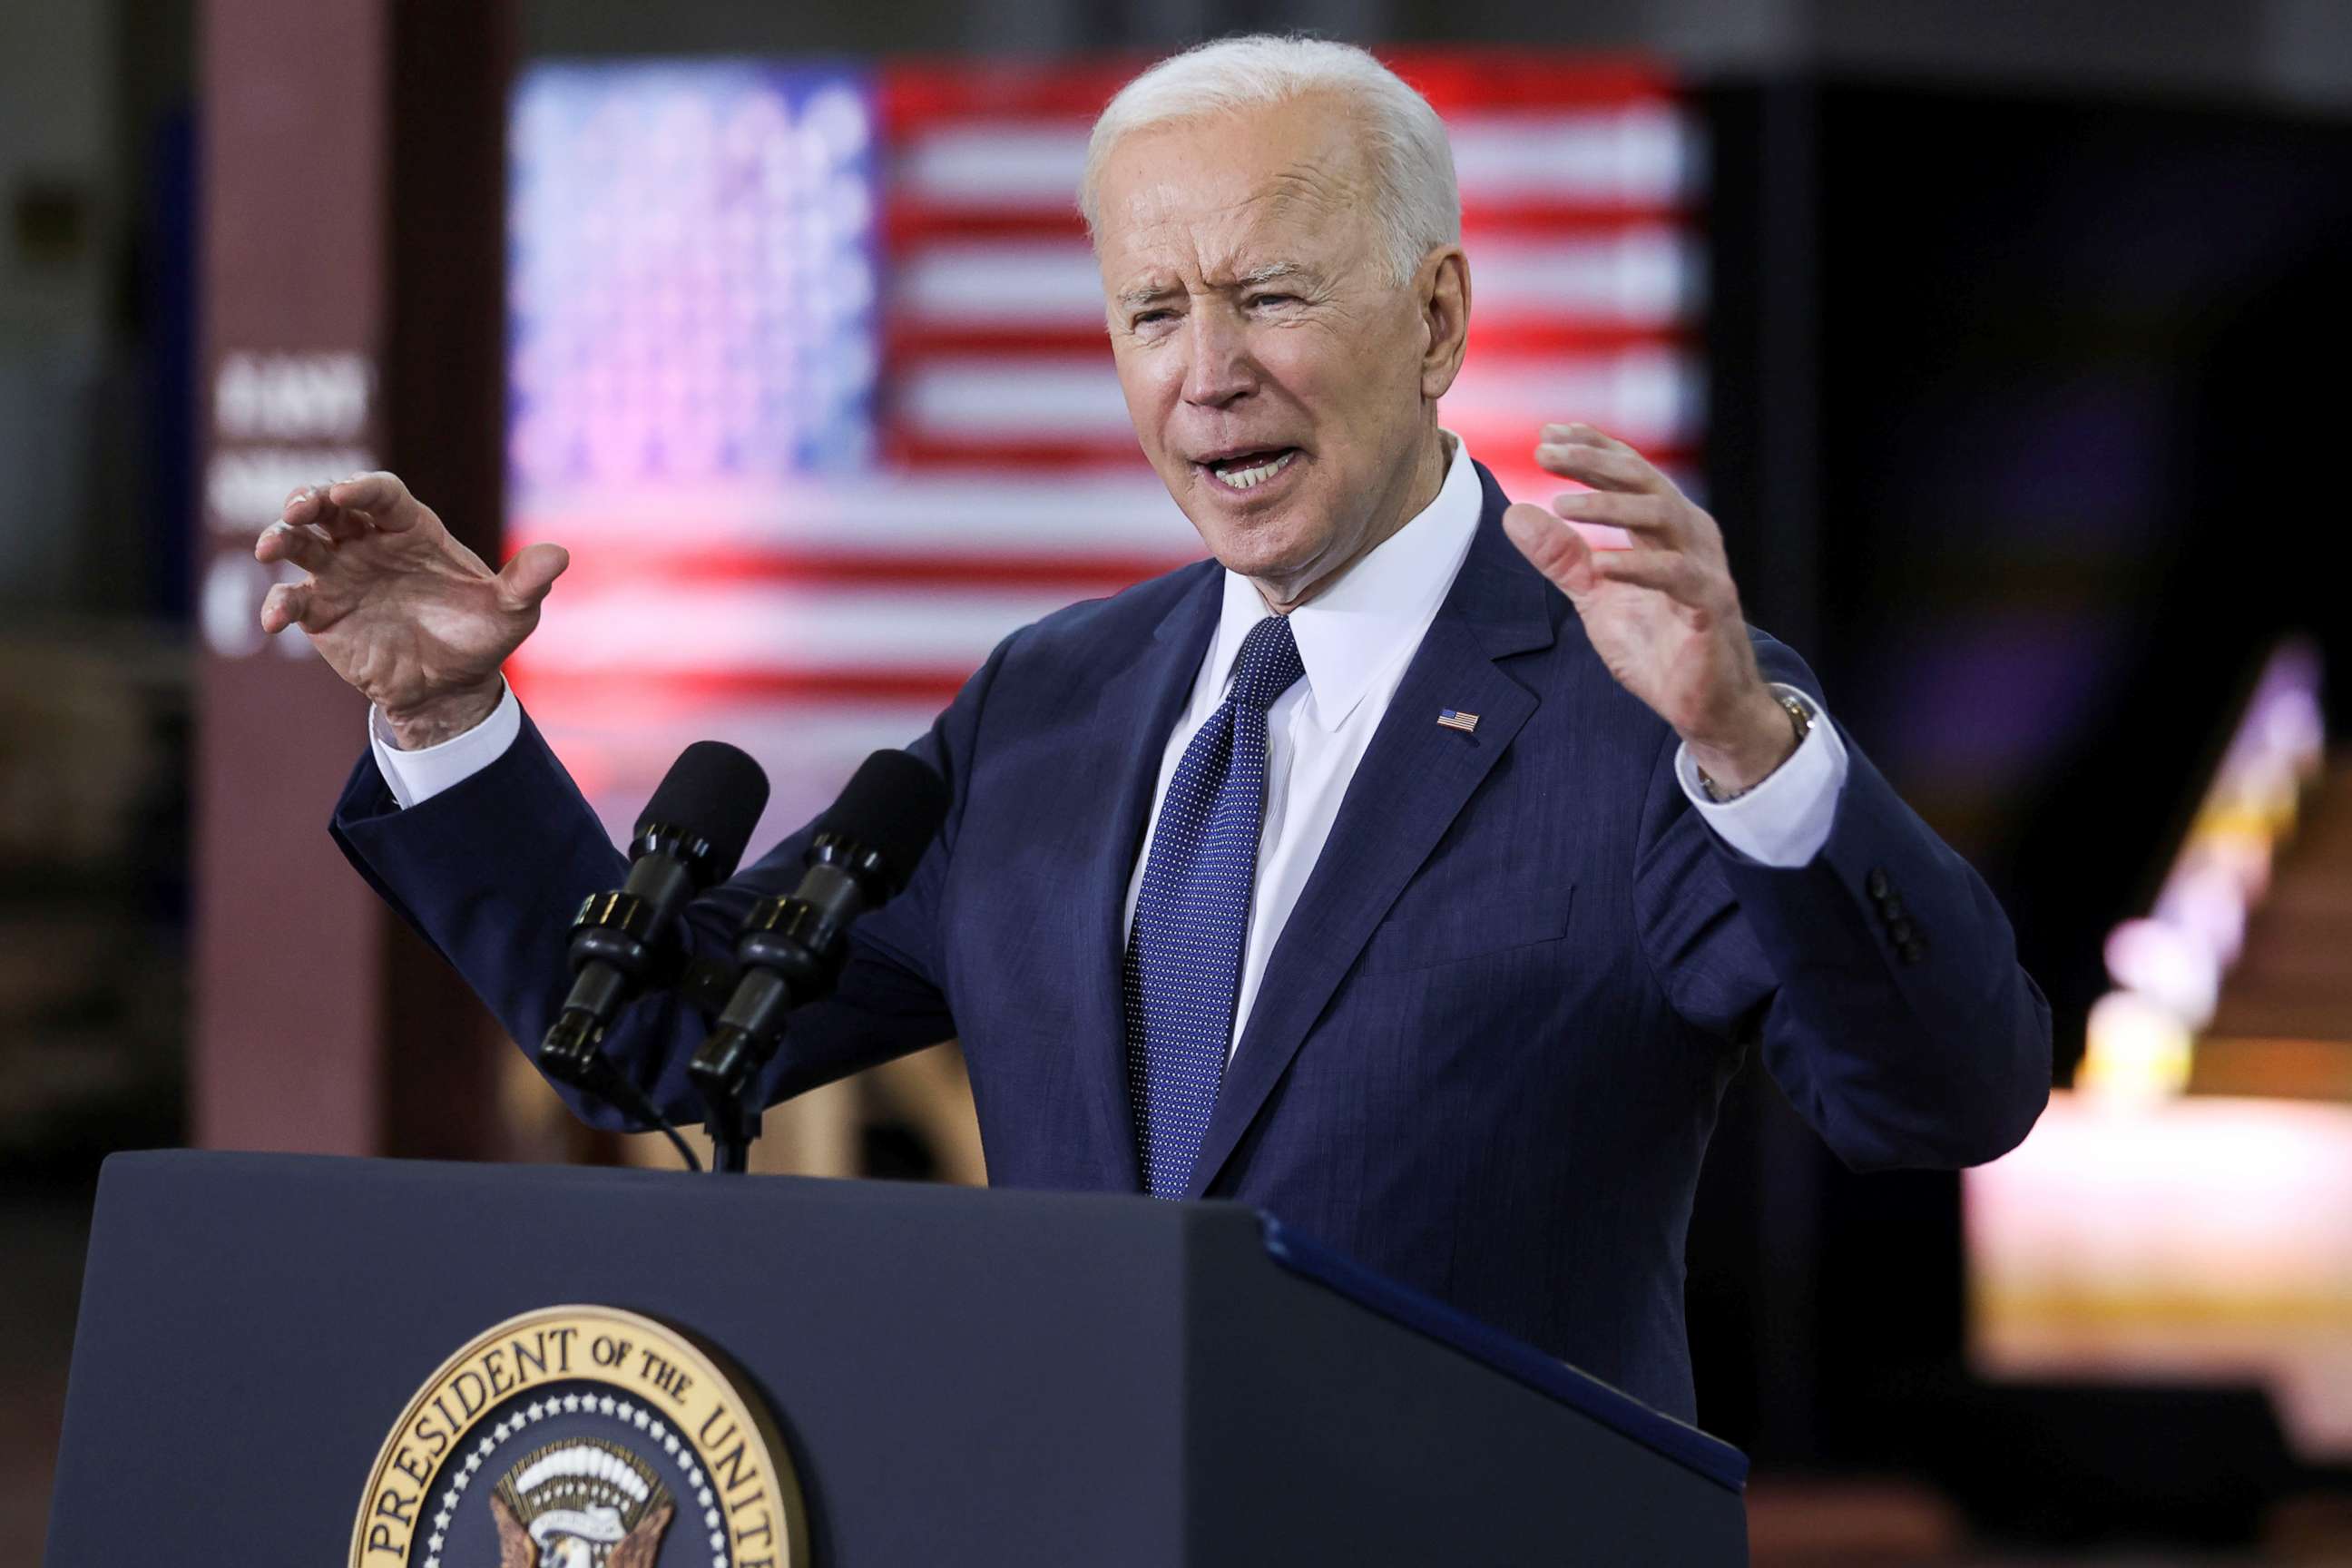 PHOTO: President Joe Biden speaks about his $2 trillion infrastructure plan during an event to tout the plan at Carpenters Pittsburgh Training Center in Pittsburgh, March 31, 2021.